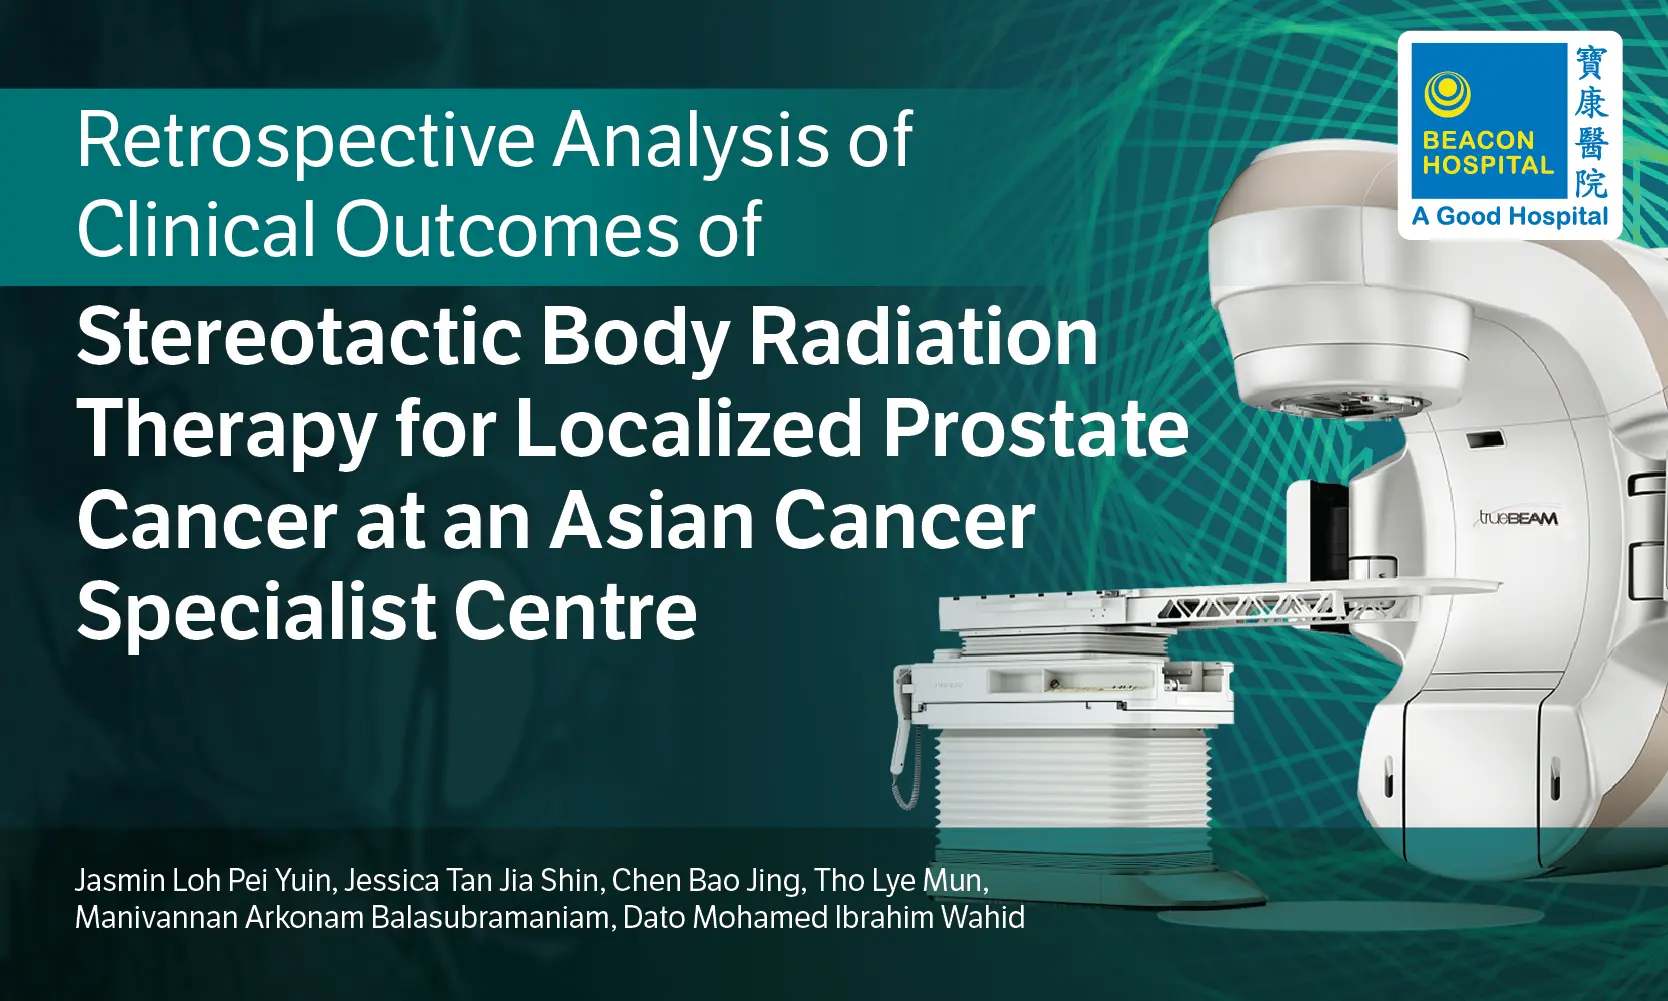 retrospective-analysis-of-clinical-outcomes-of-stereotactic-body-radiation-therapy-for-localized-prostate-cancer-at-an-asian-cancer-specialist-centre